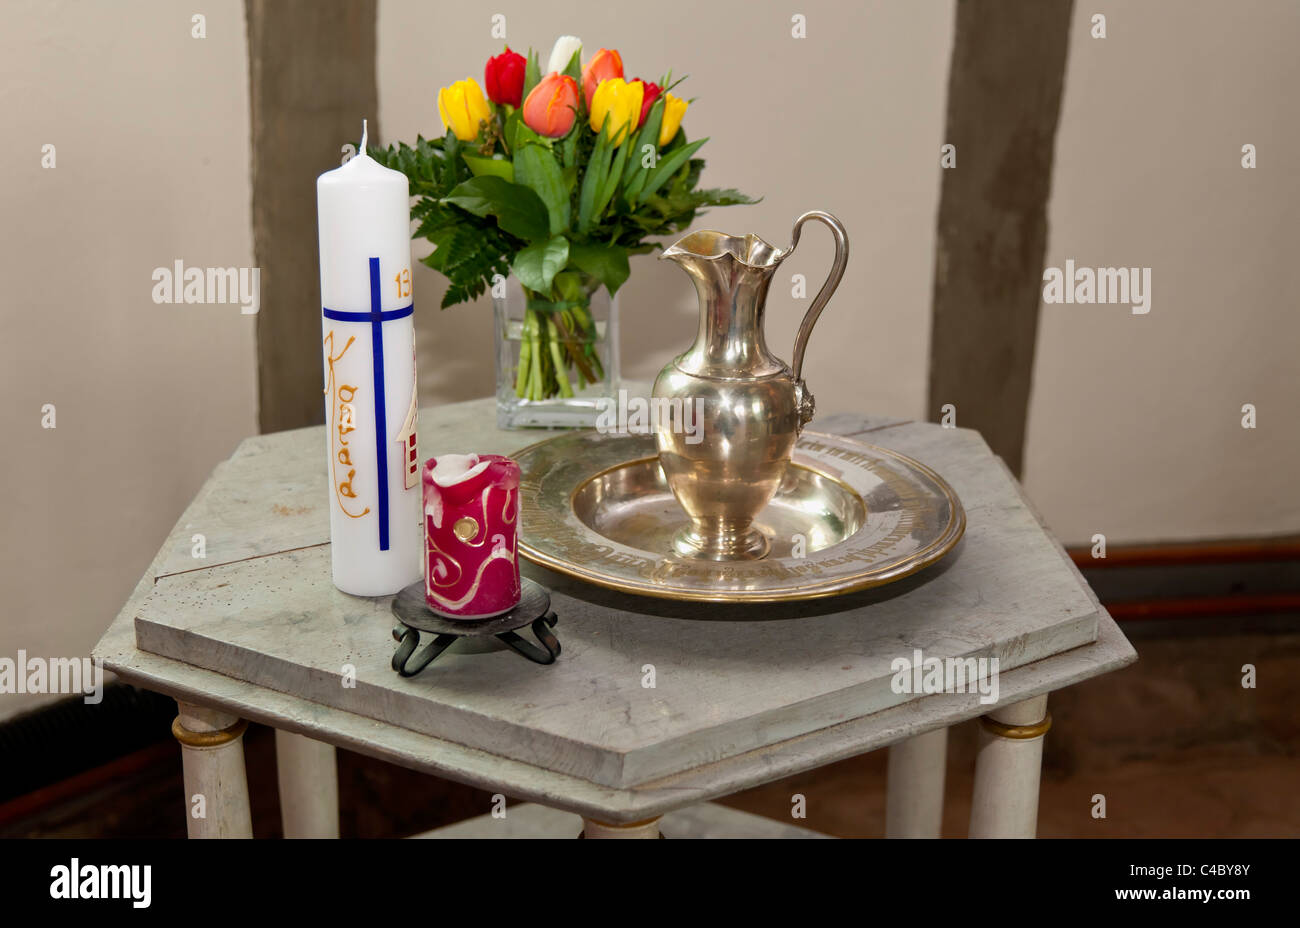 Requisites for Christening: baptism candle with the name Konrad, flowers, jug for baptismal water Stock Photo